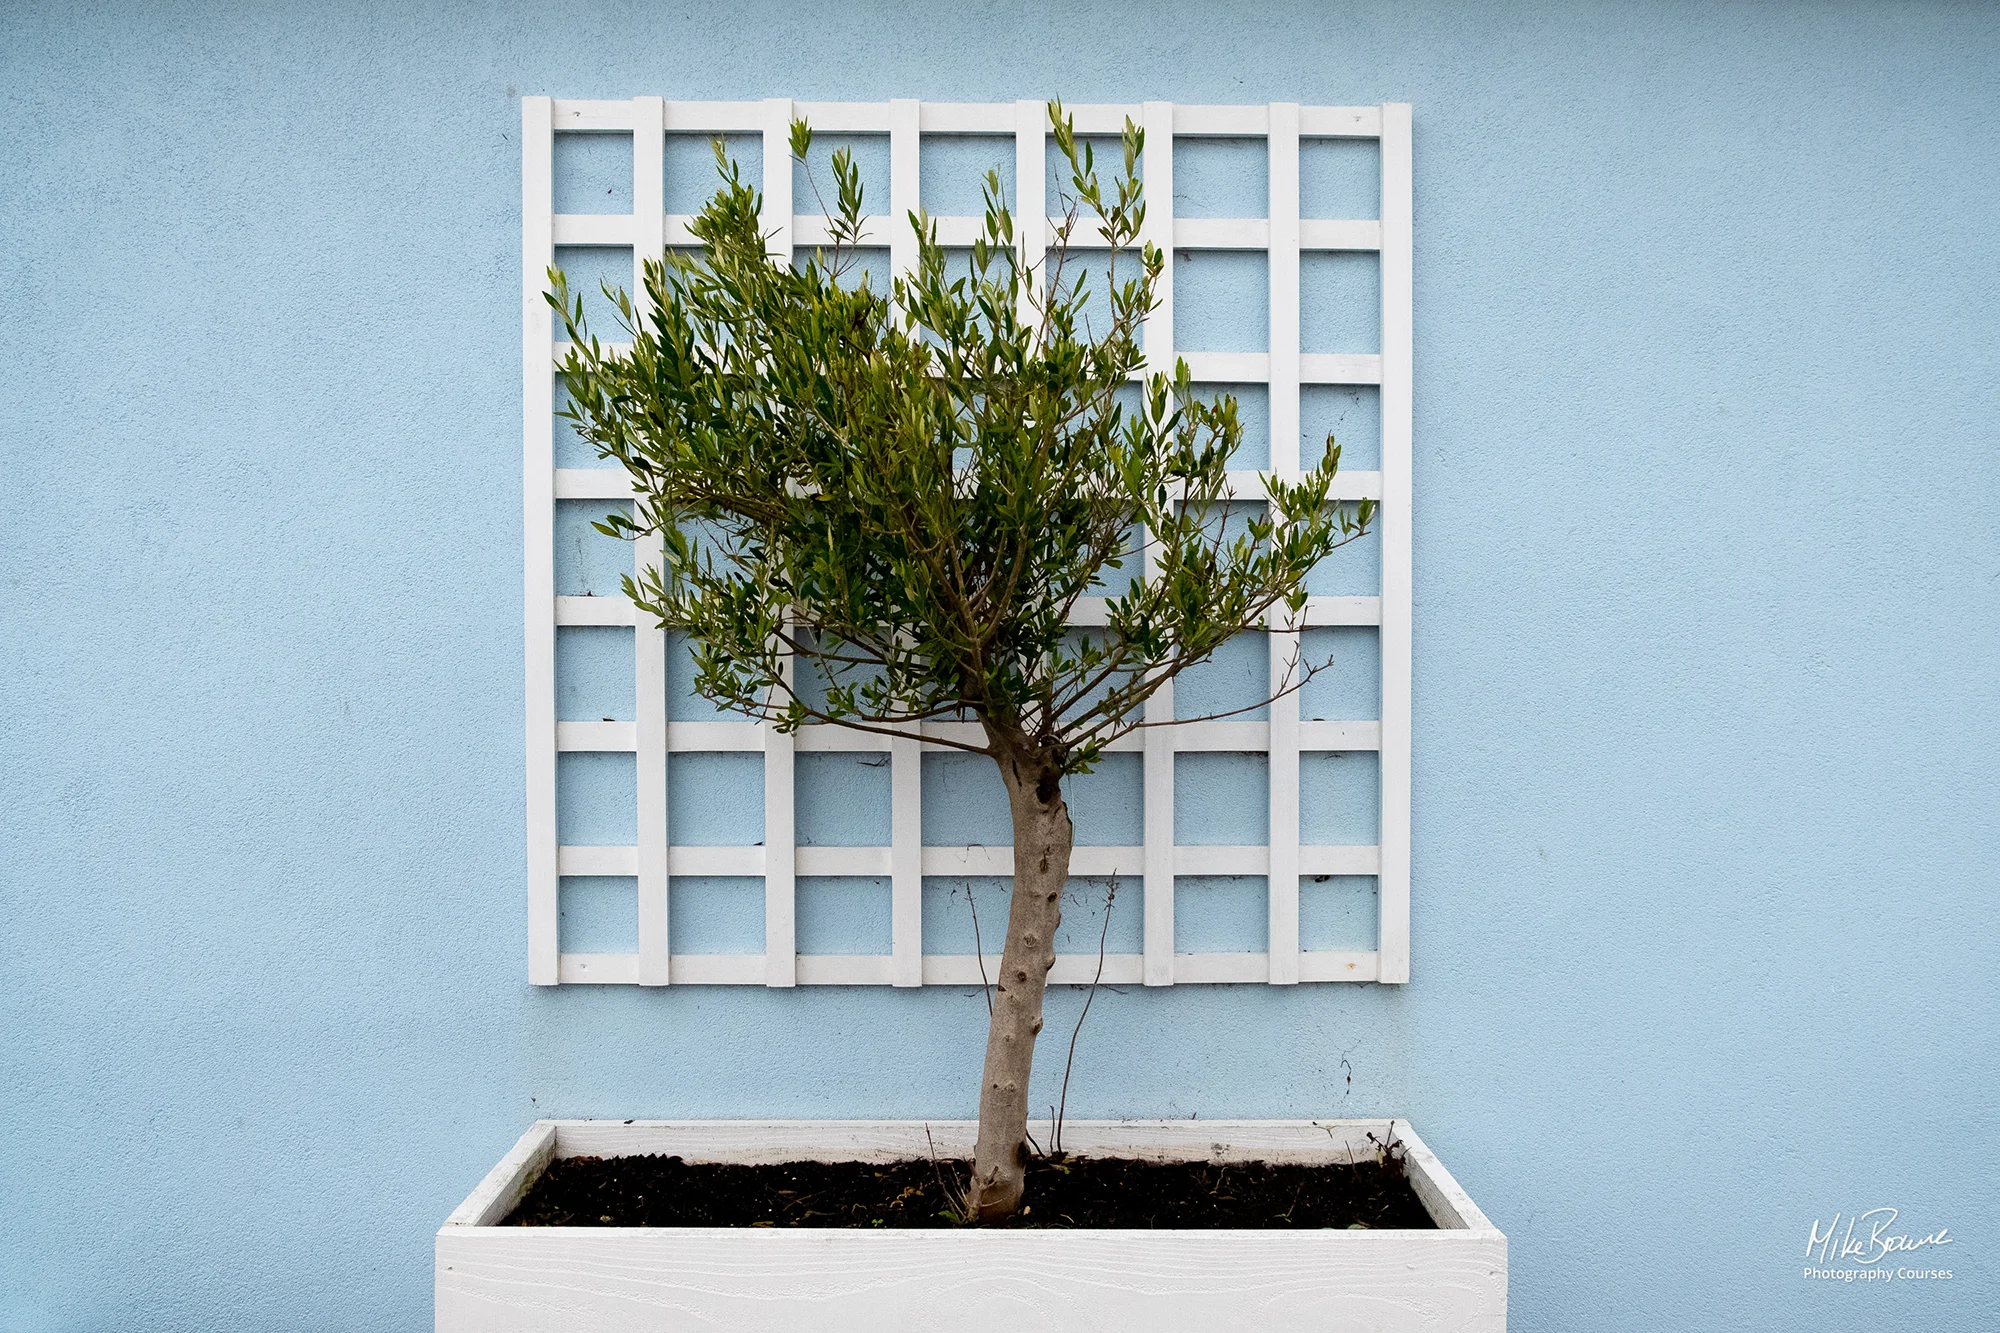 small green tree in a planter against blue wall with square white trellis